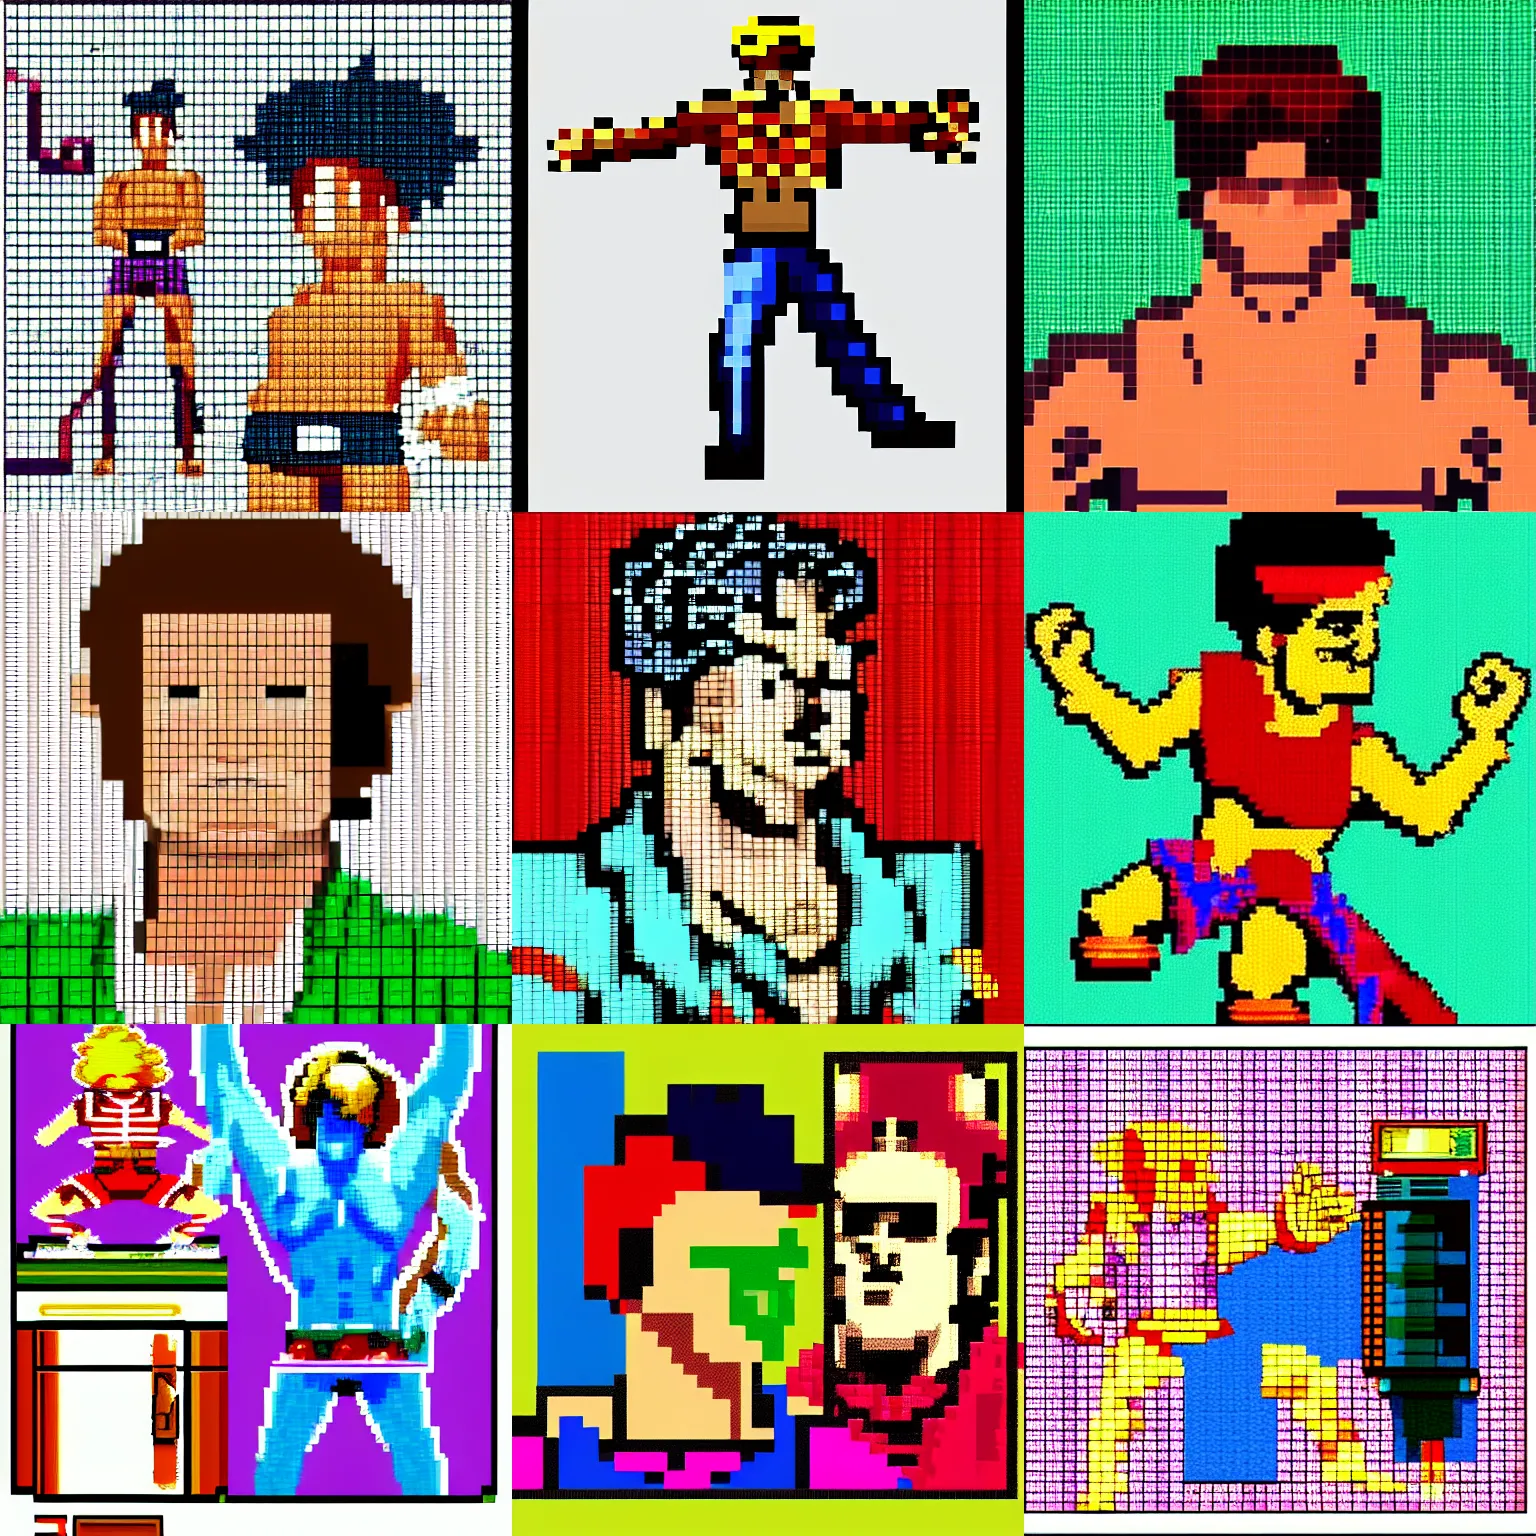 Prompt: Pauly shore streetfighter 2 pixel art character